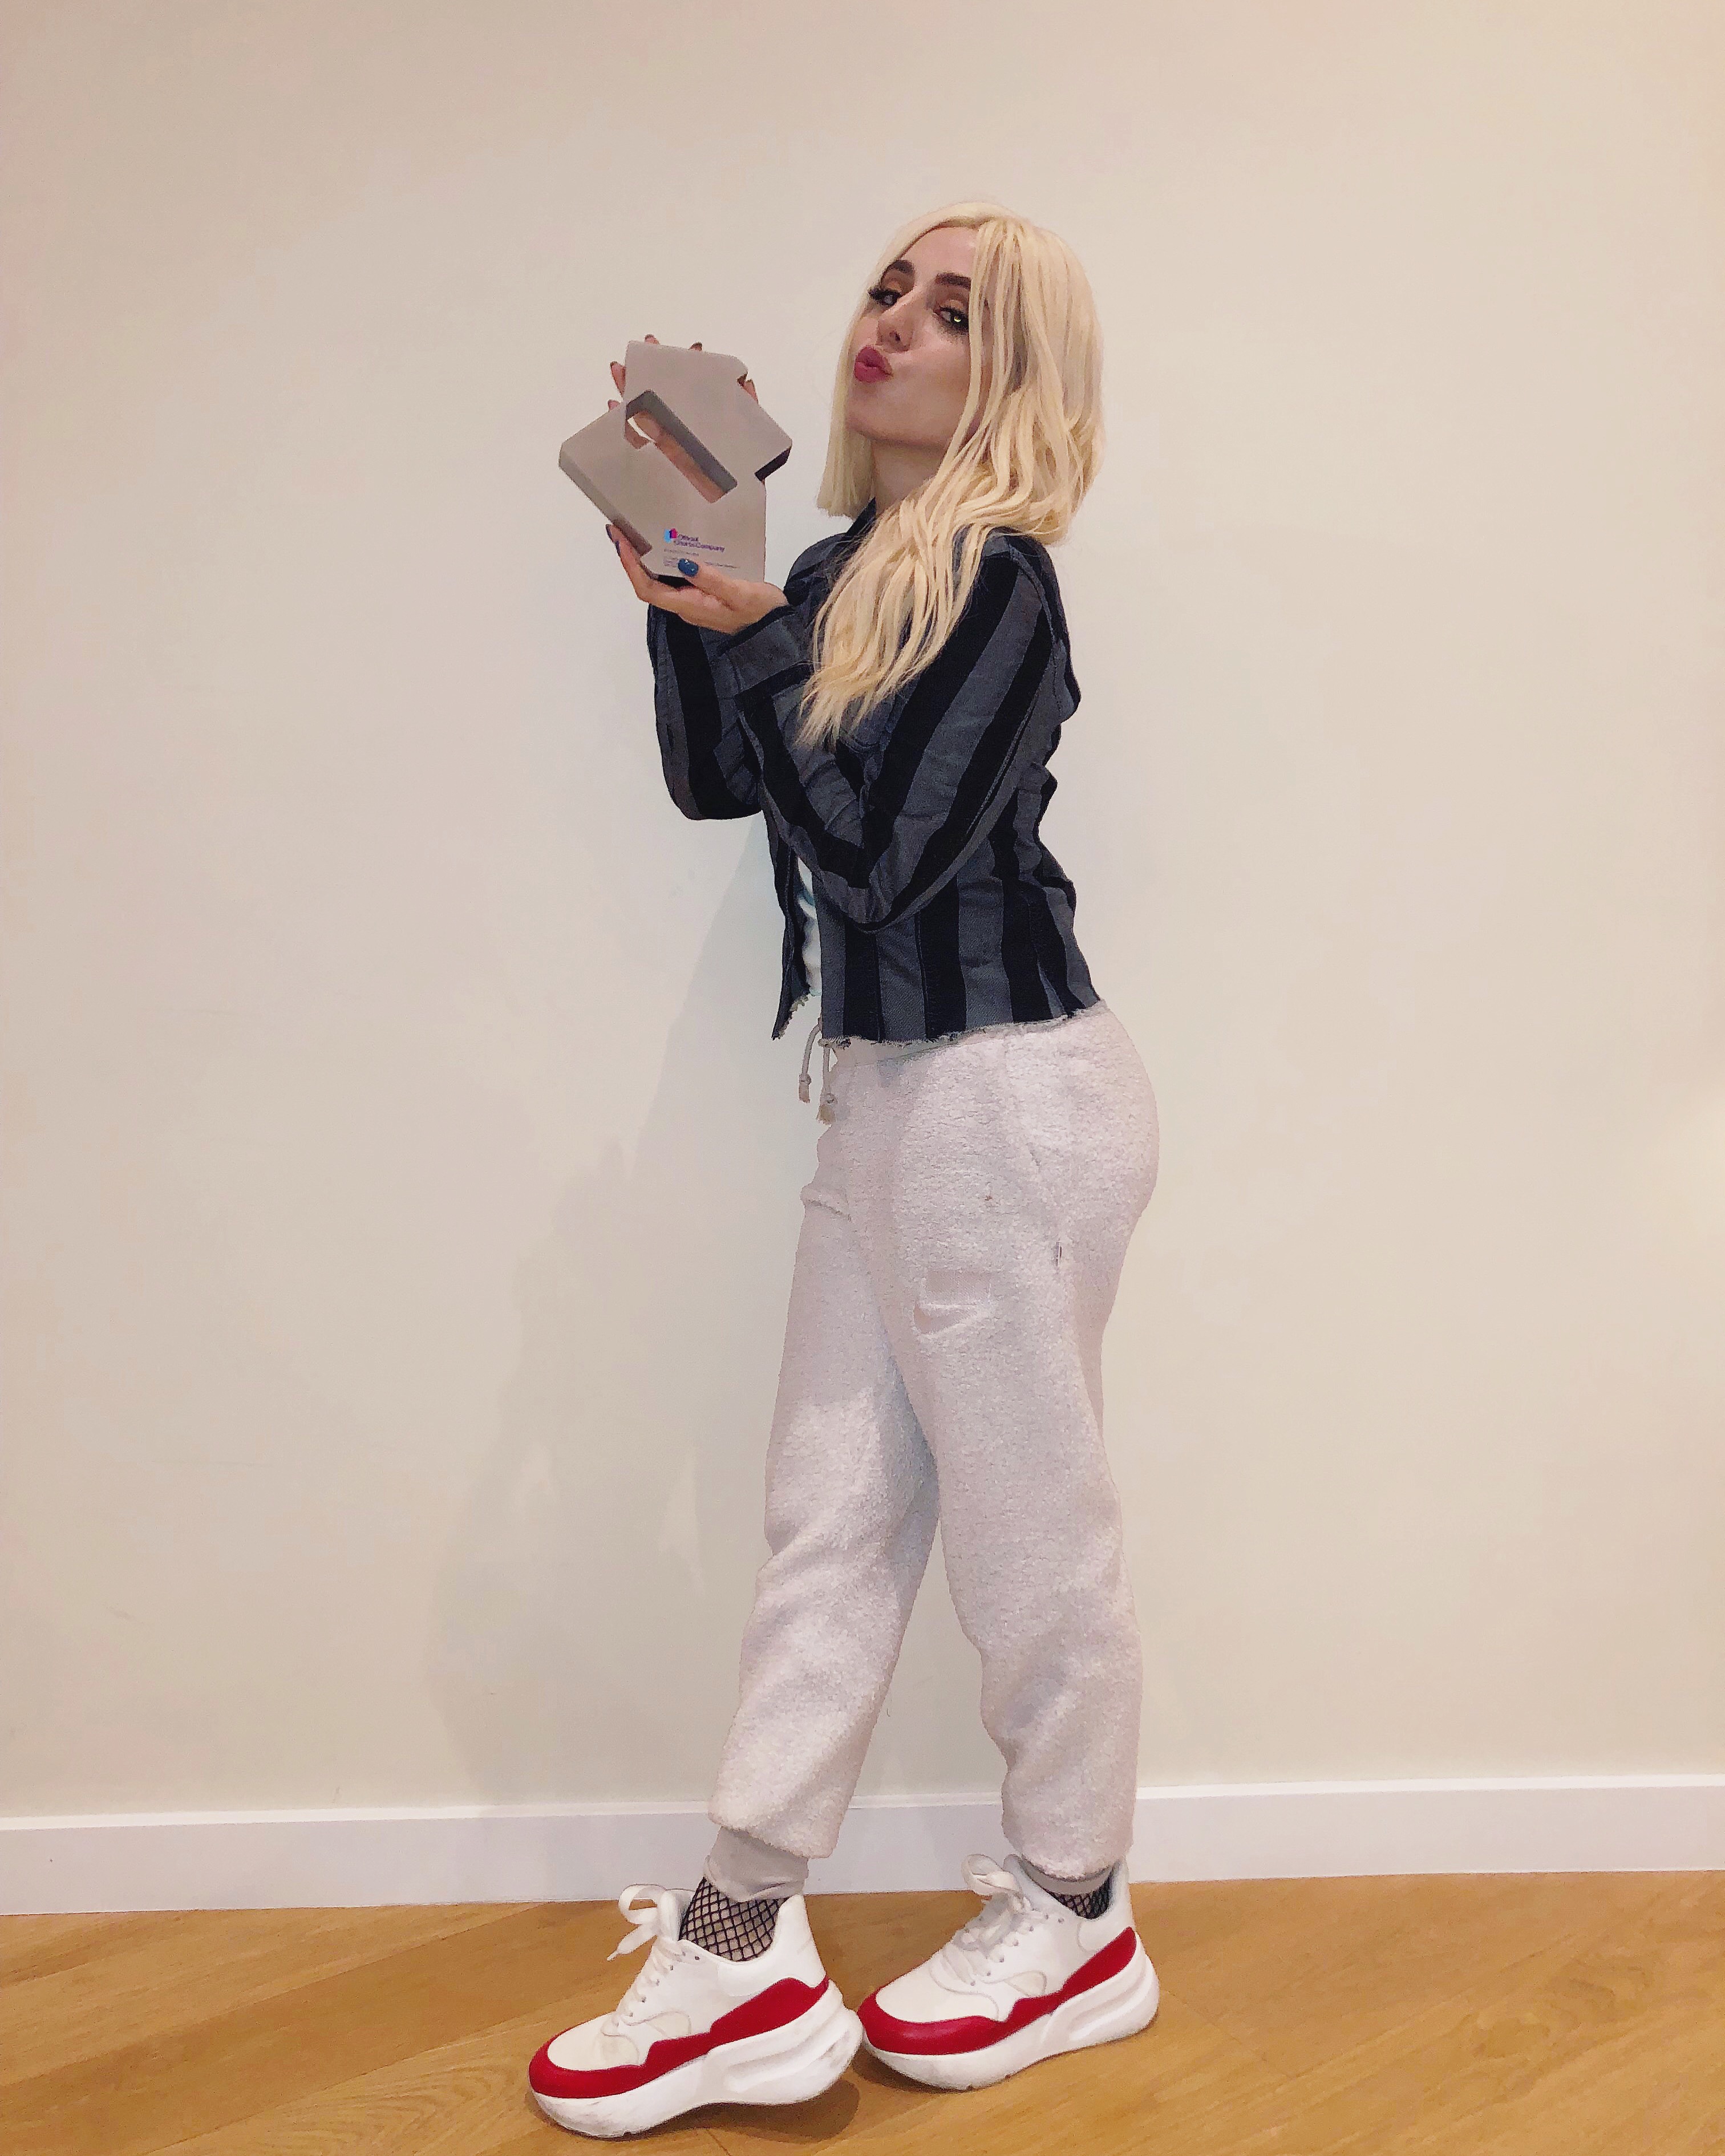 Ava Max And Tom Walker Among Best Selling Artists Of 2019 So Far